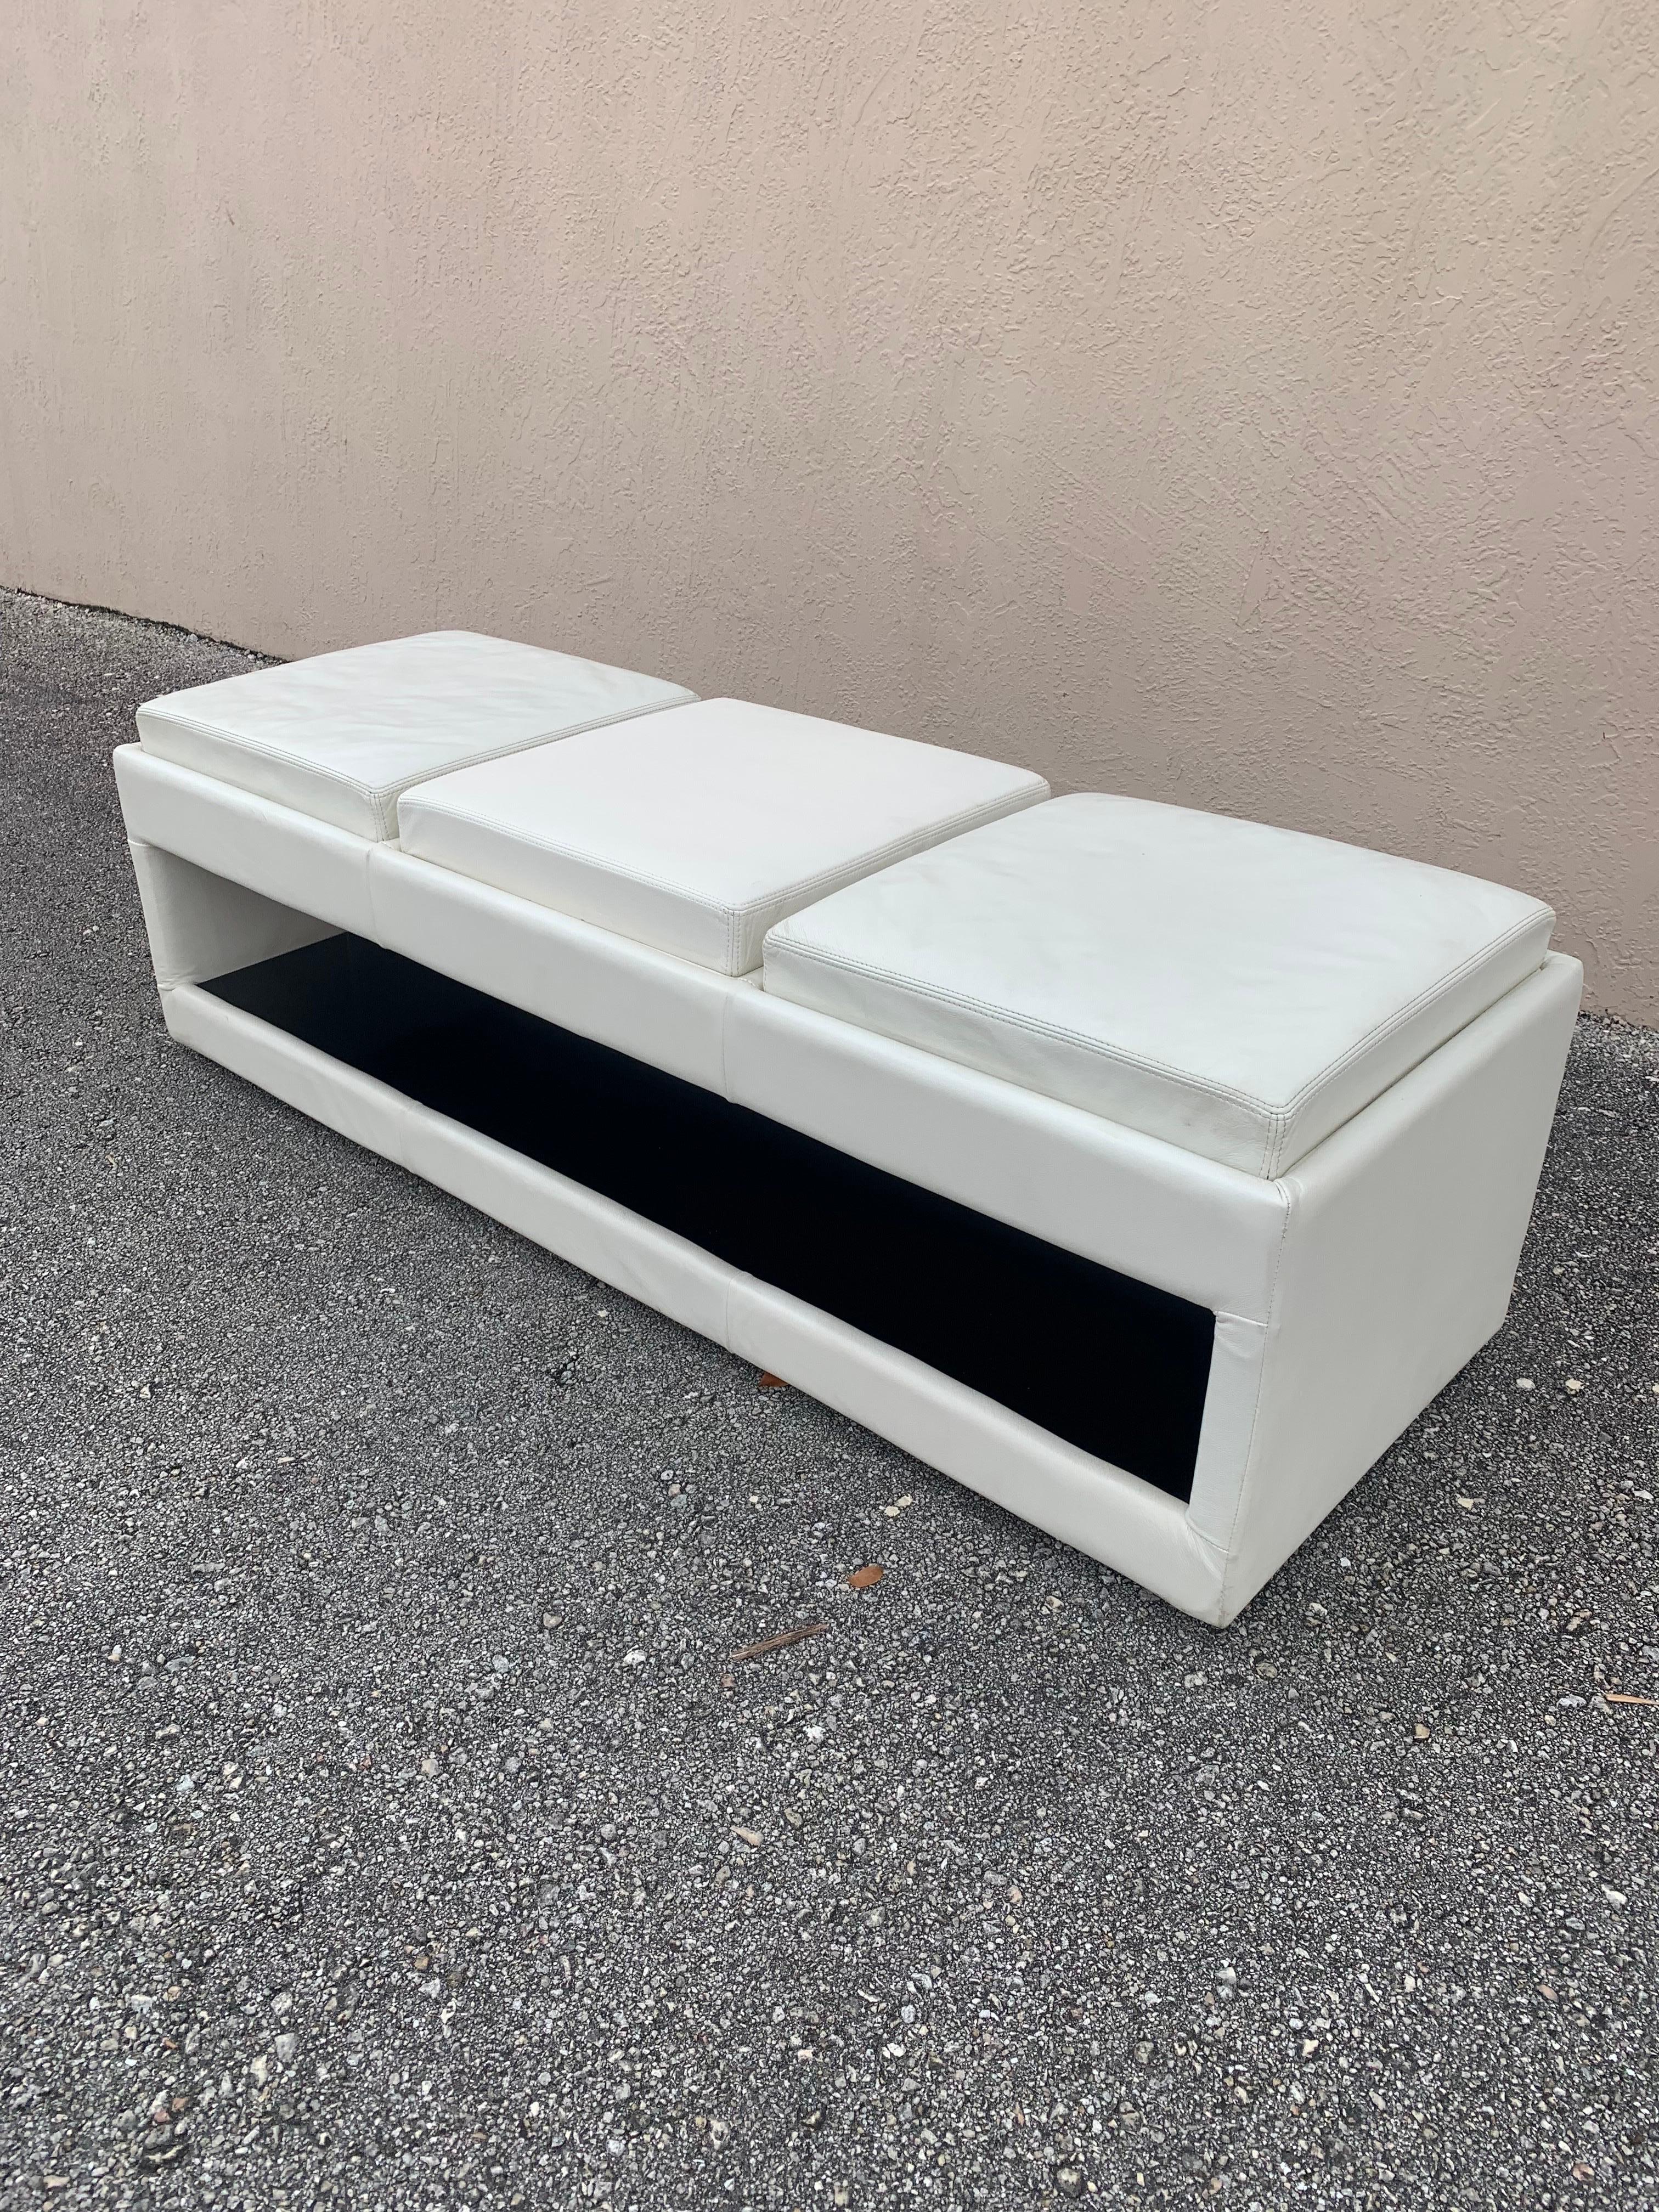 American Leather 3 Seat Benches in White, a Pair In Good Condition For Sale In Boynton Beach, FL